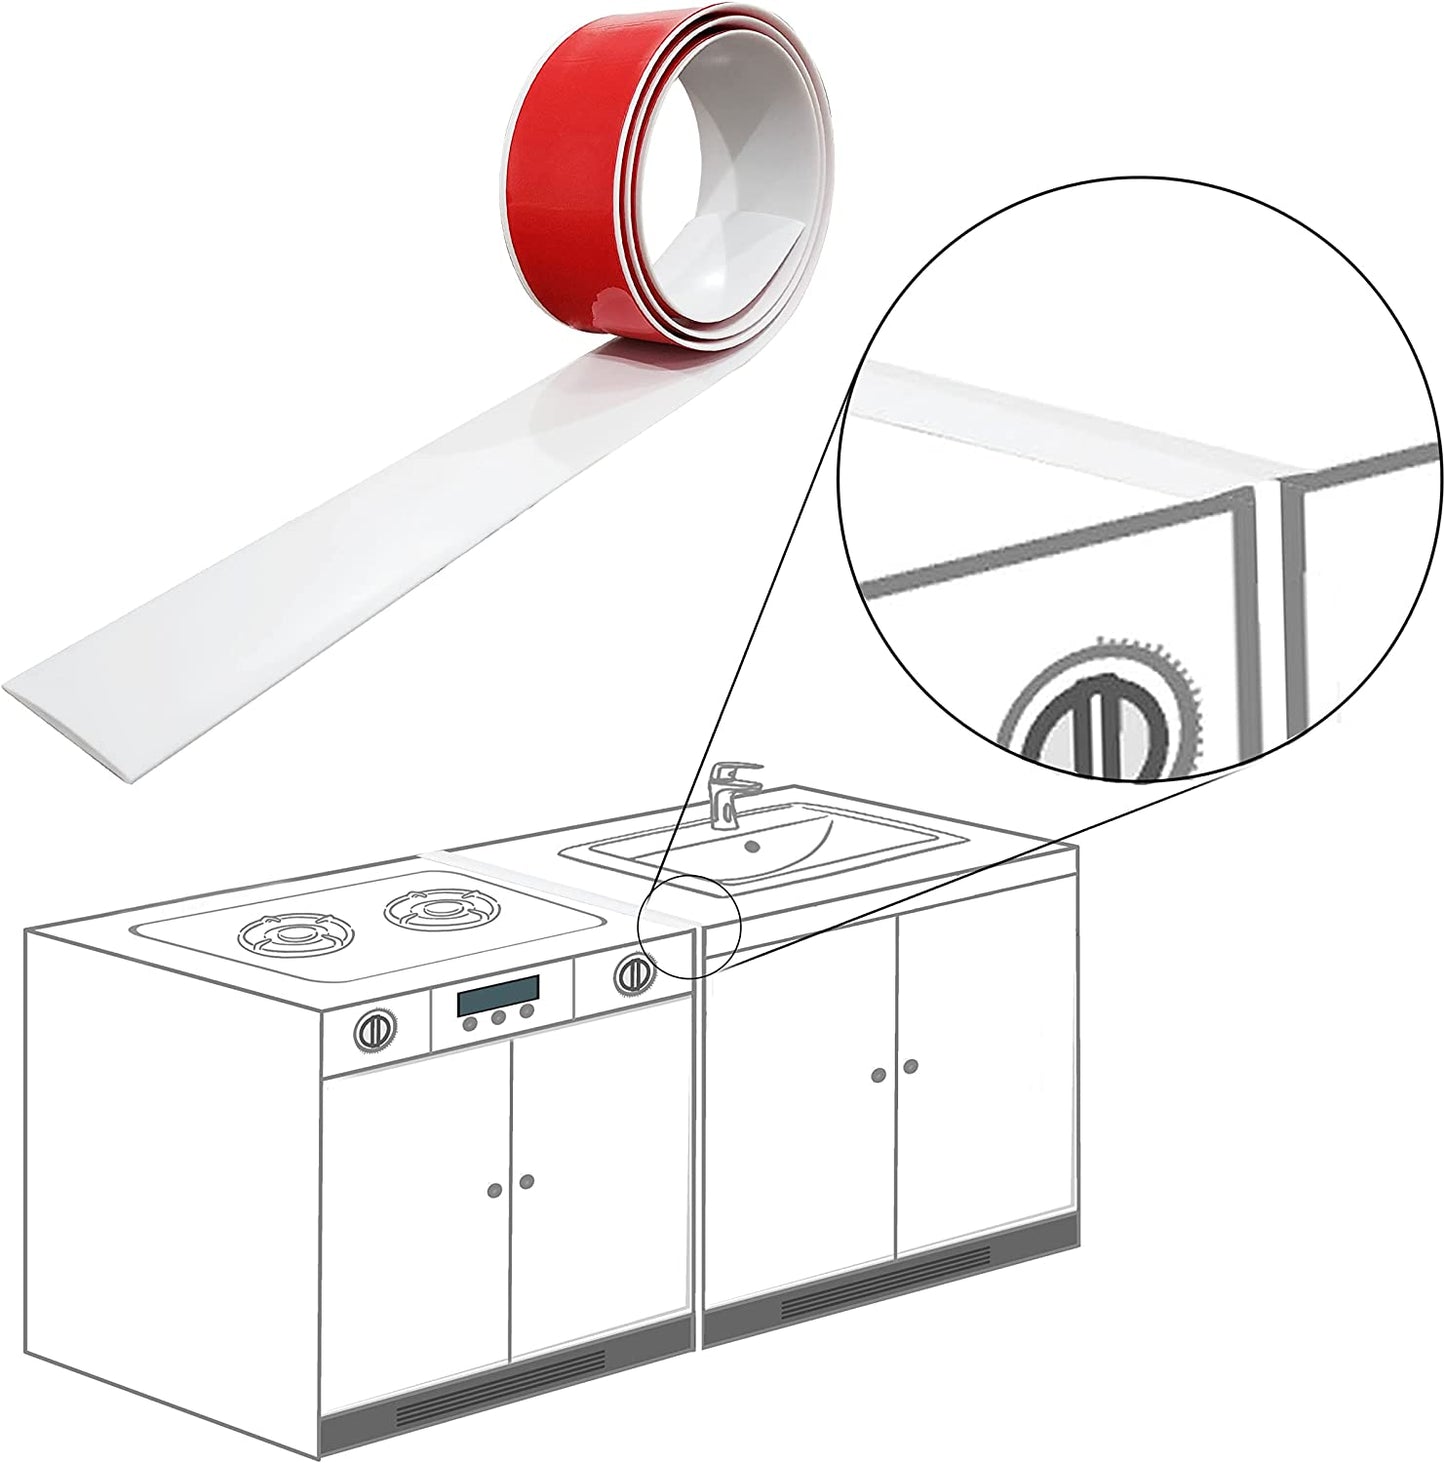 Kitchen Stove Gap Covers - Self-Adhesive & Heat Resistant